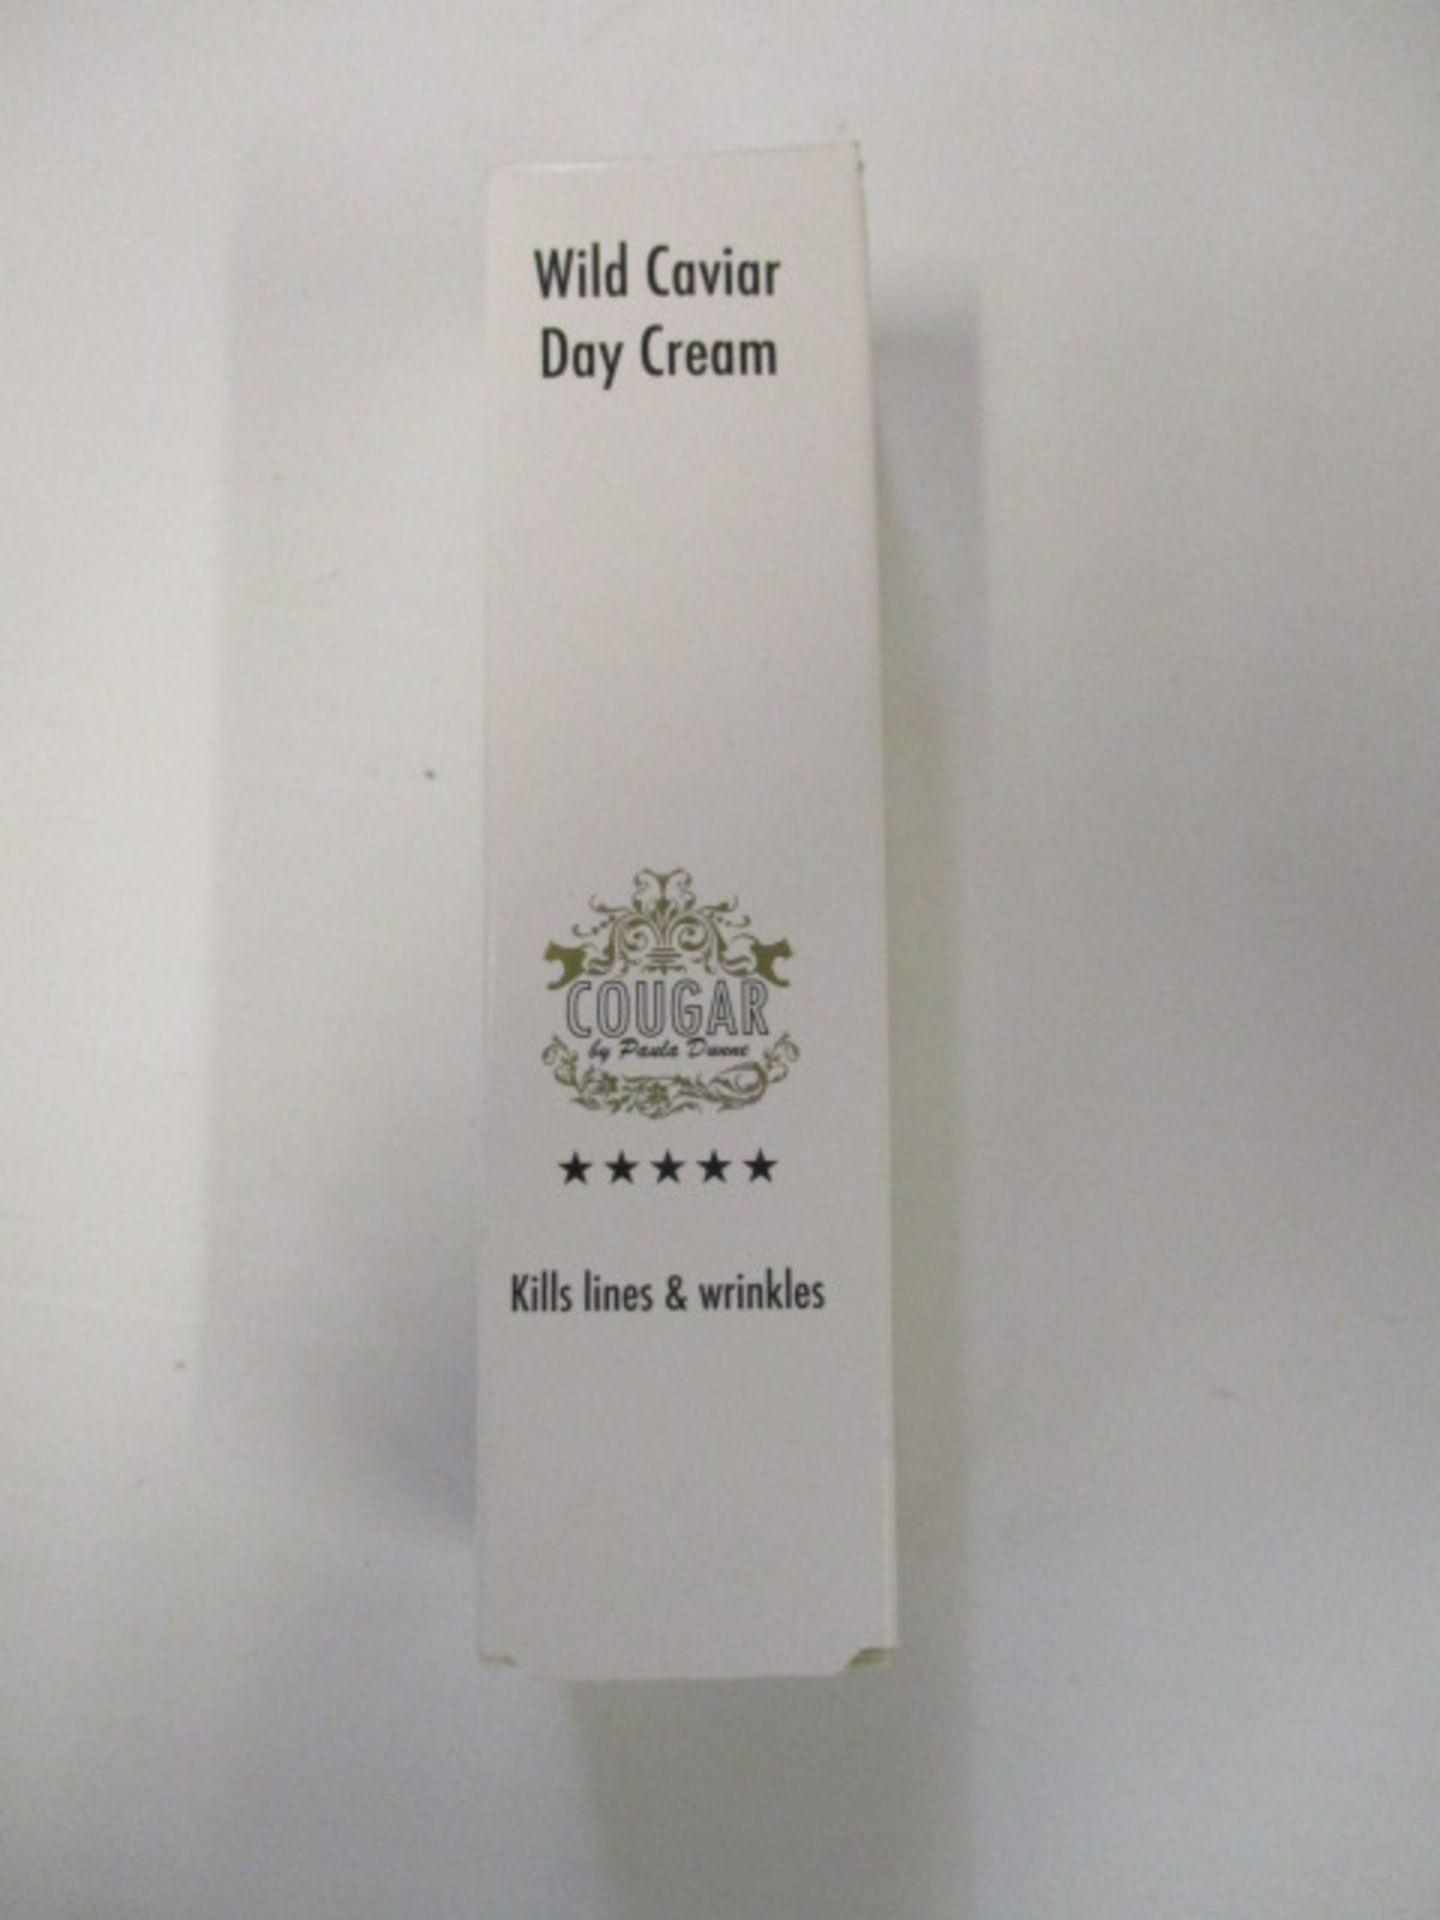 Wild Caviar day cream . From the Cougar Make up range - a selection of premium make up which